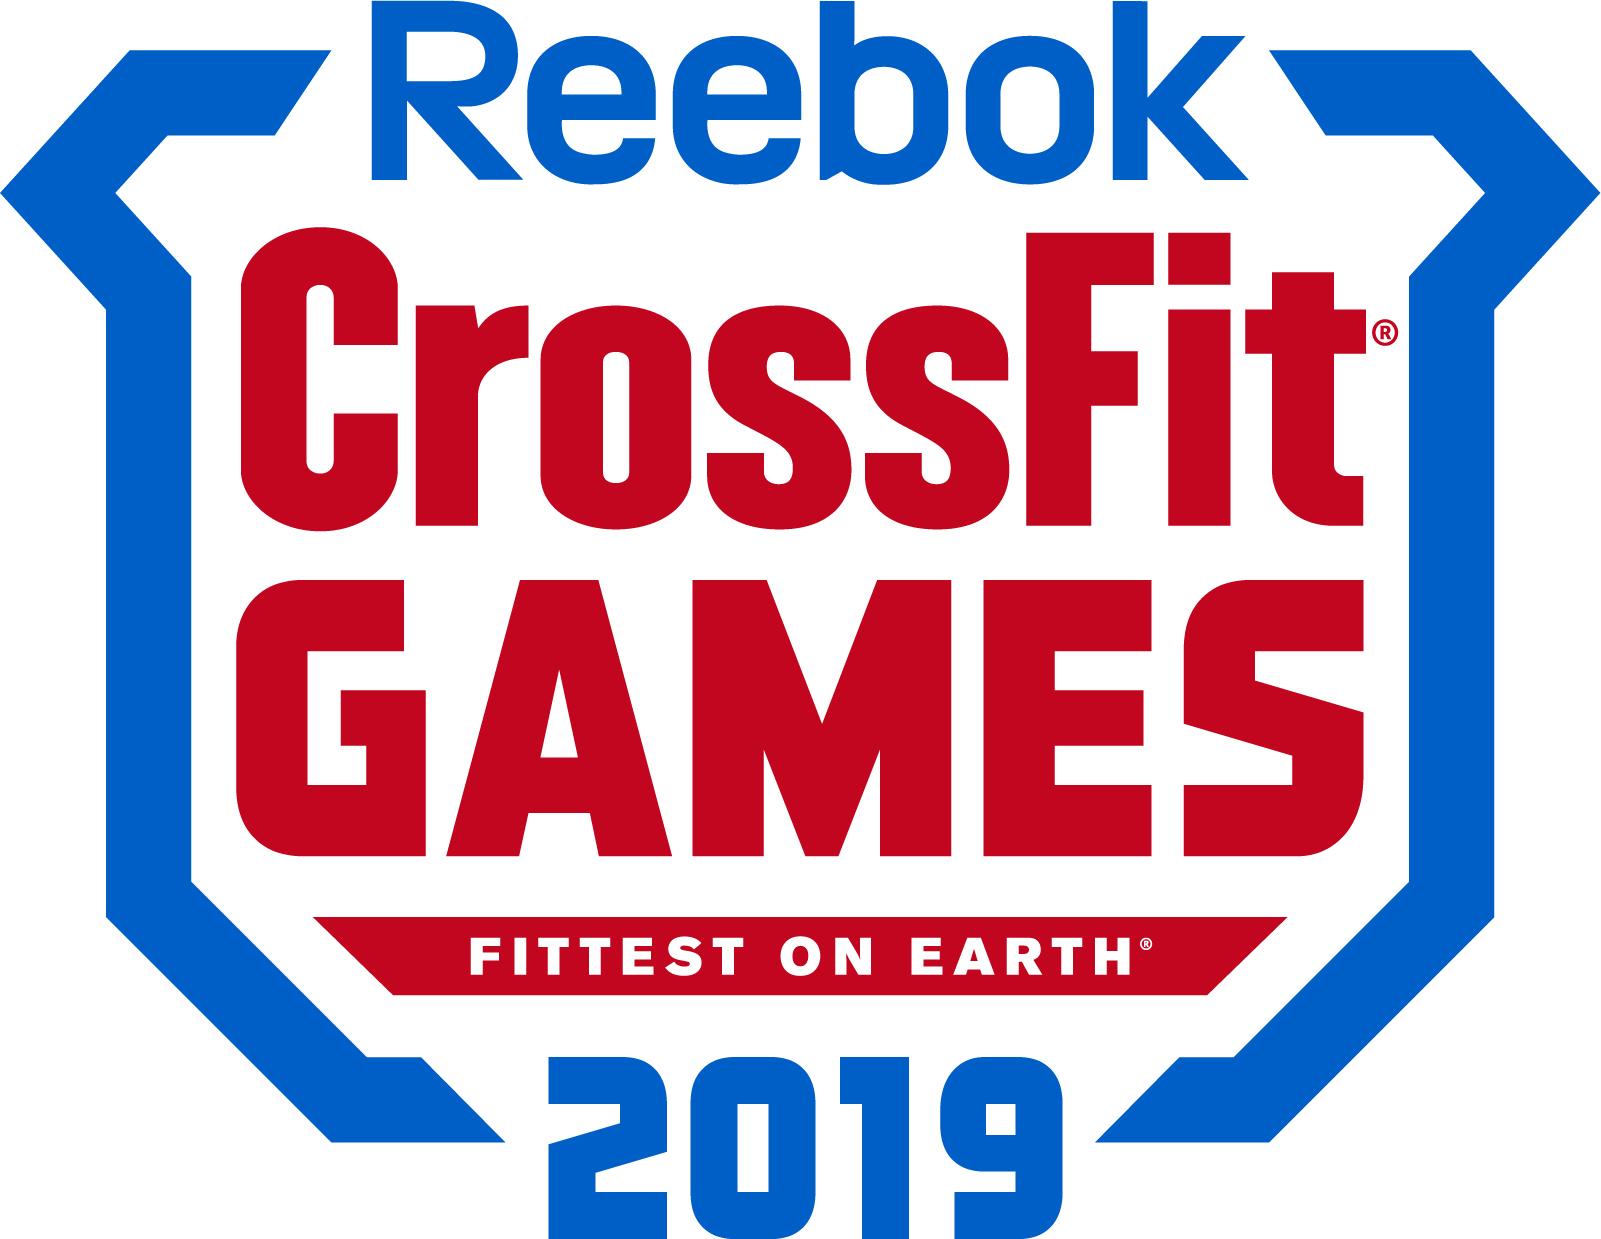 CrossFit Games. The Fittest on Earth